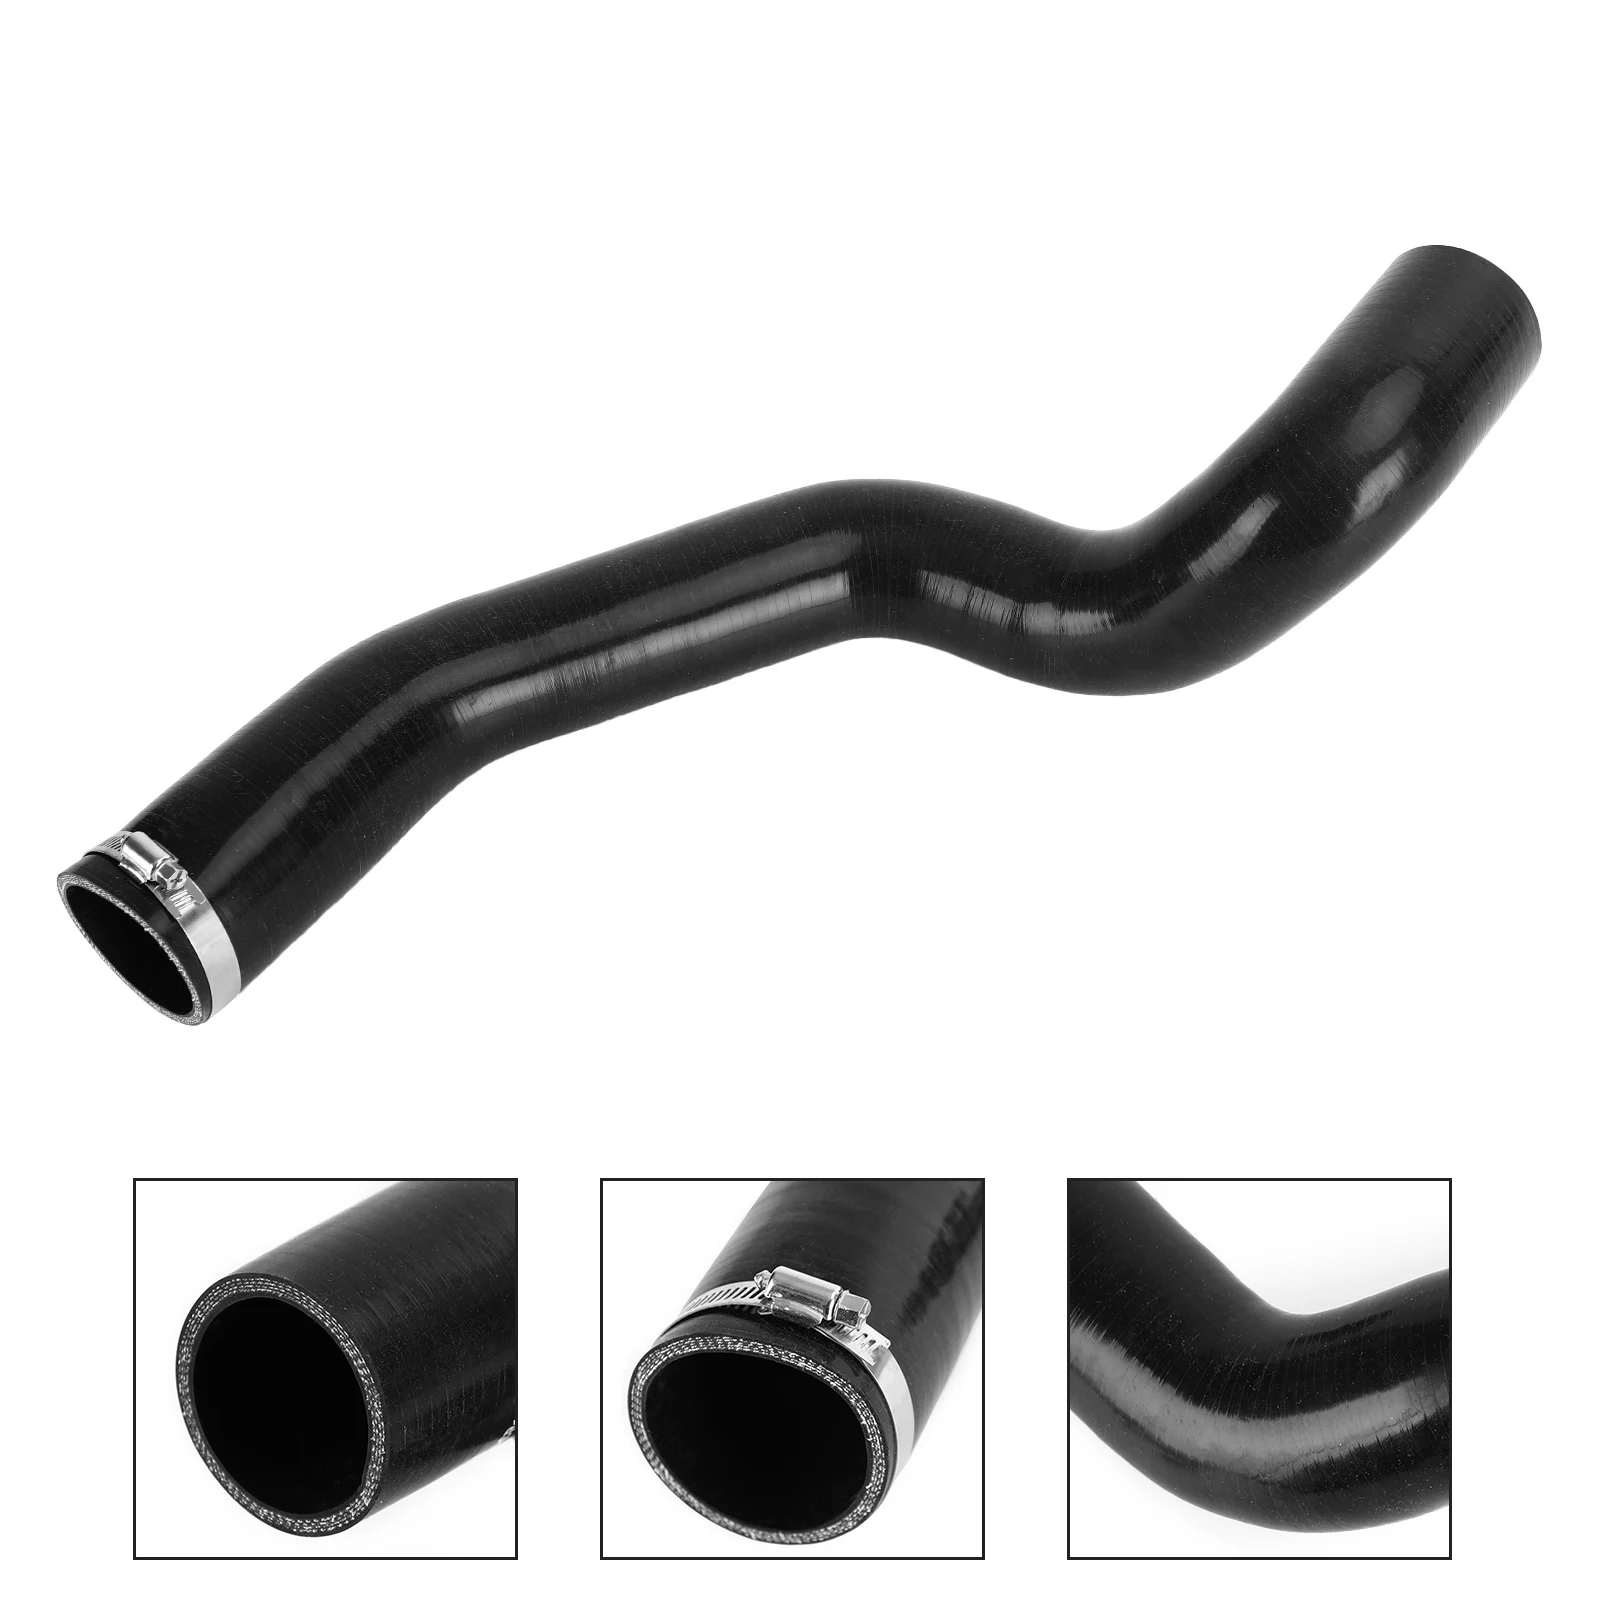 

Areyourshop New Intercooler Cold Side Hose For Ford Ranger PX For Mazda BT50 3.2L 2012+ Black BP-XCHJ579-F Car Auto Parts